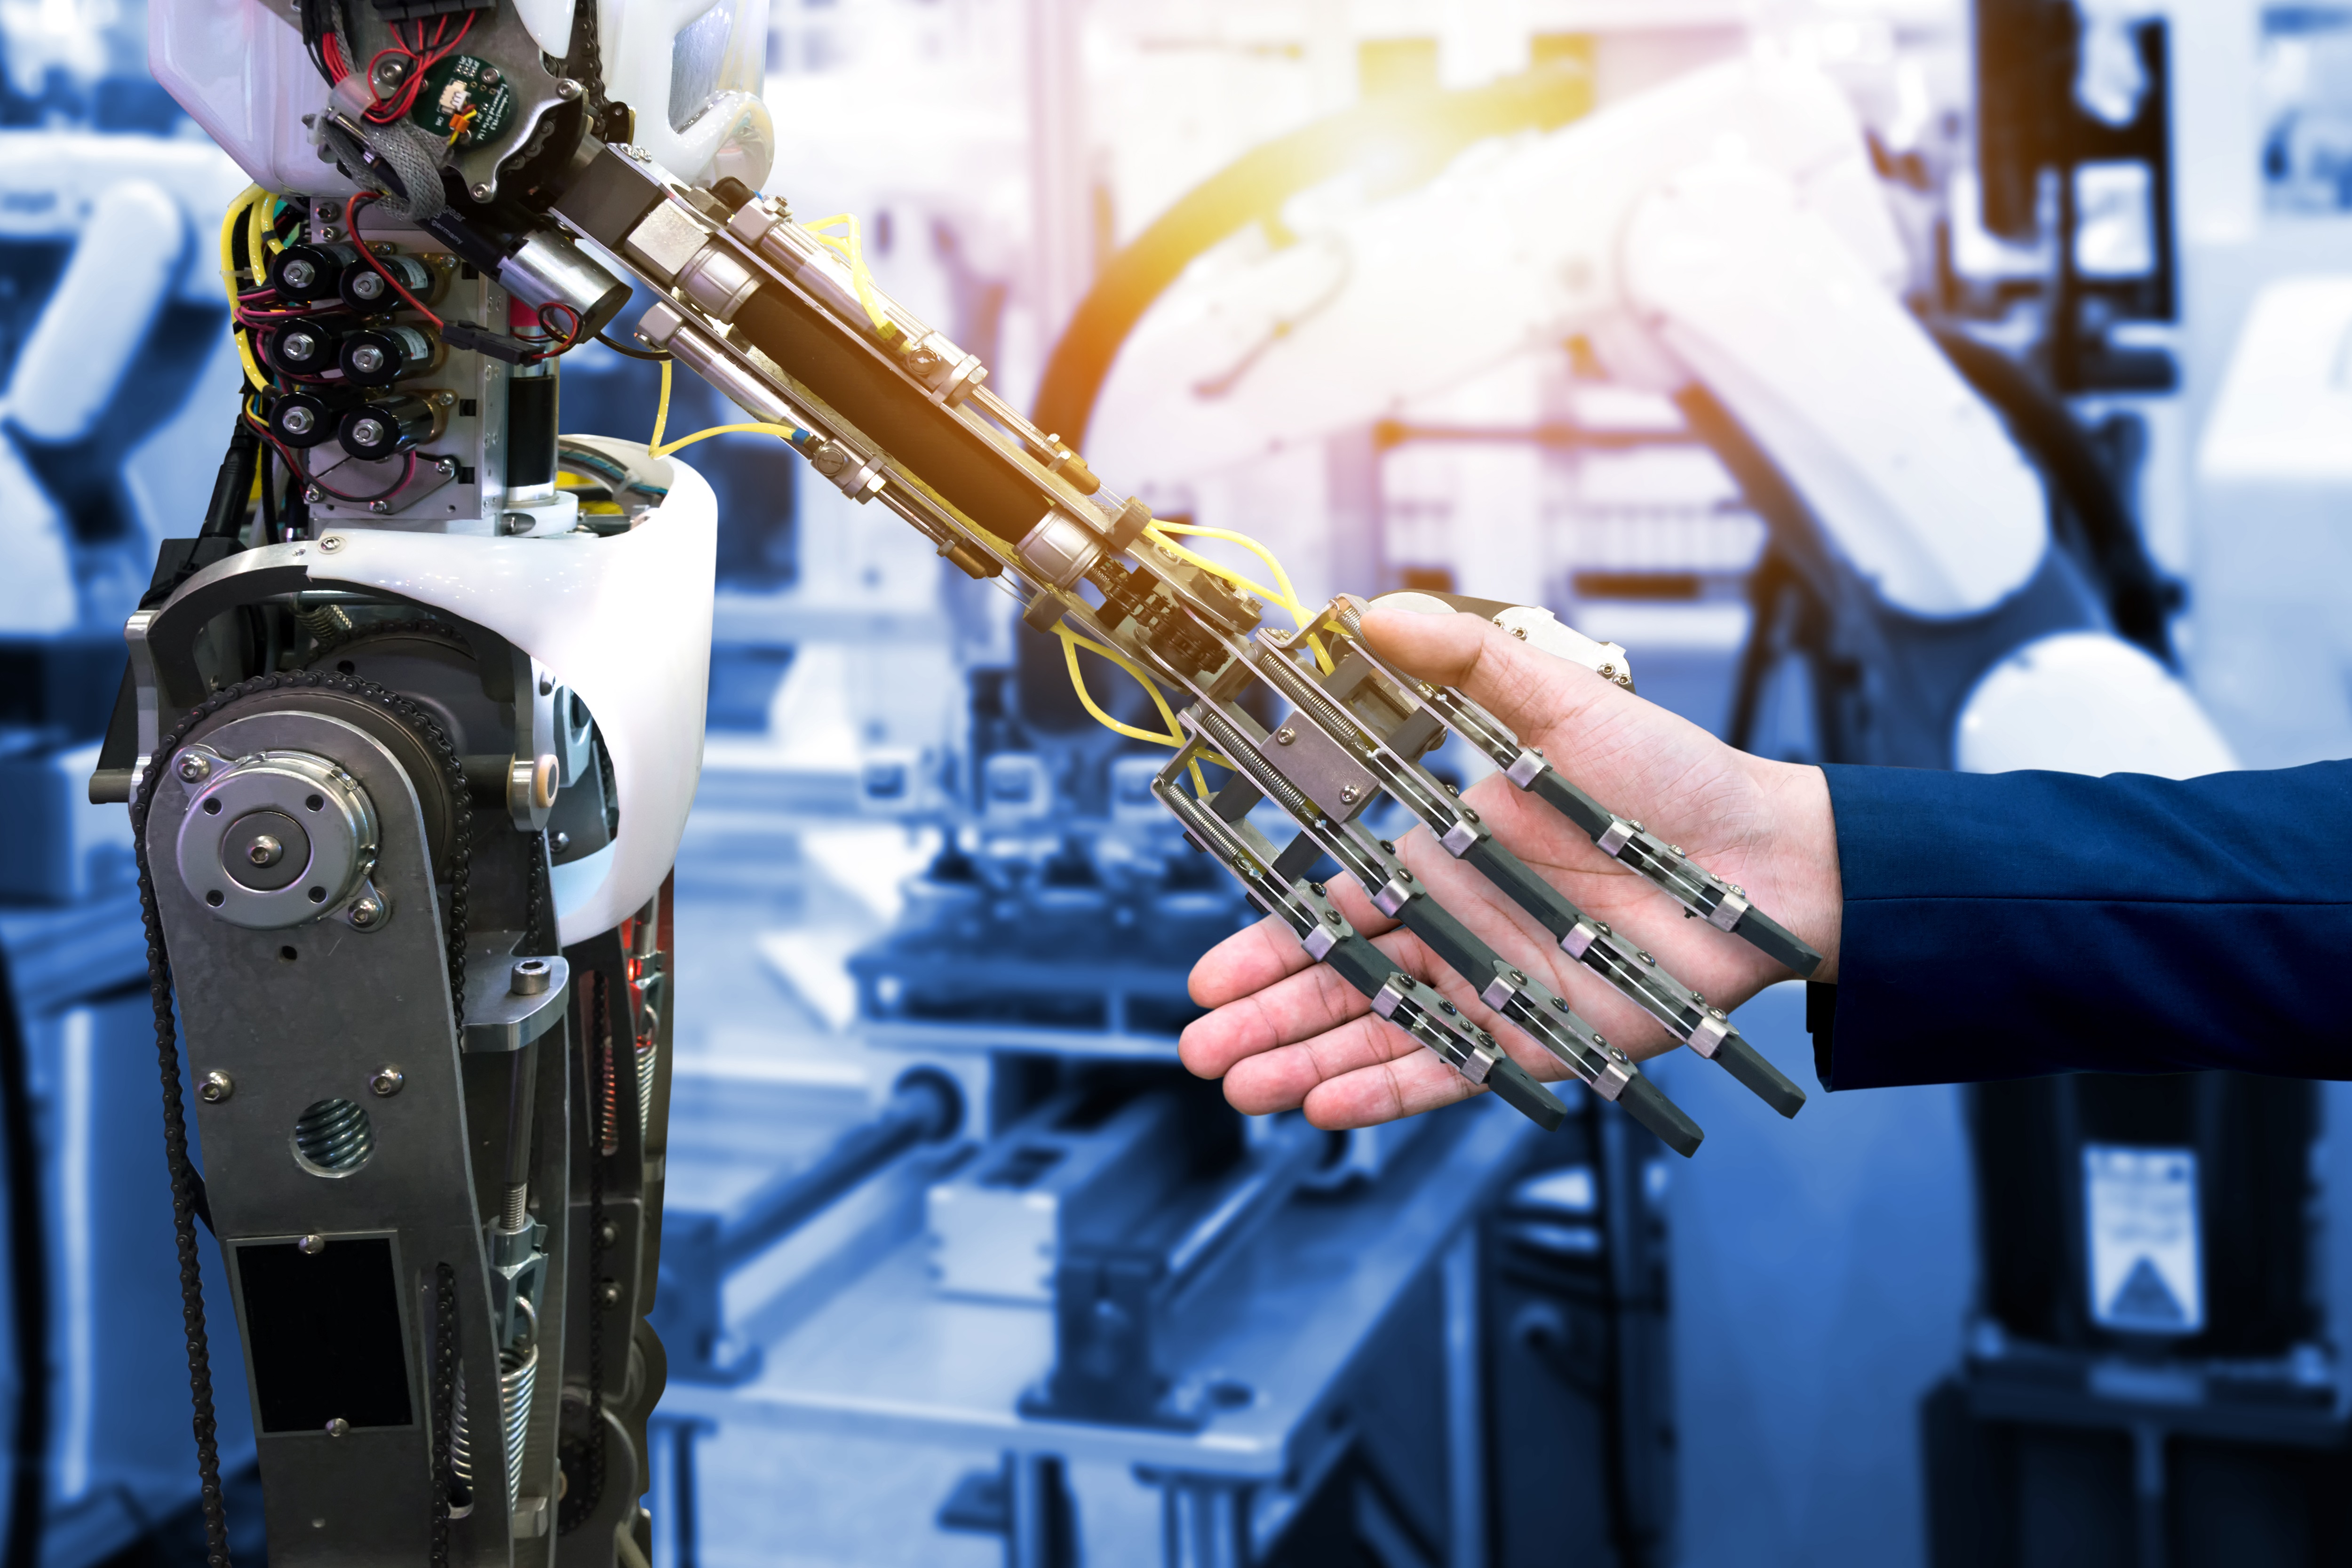 Communication and robotics additive manufacturing trends